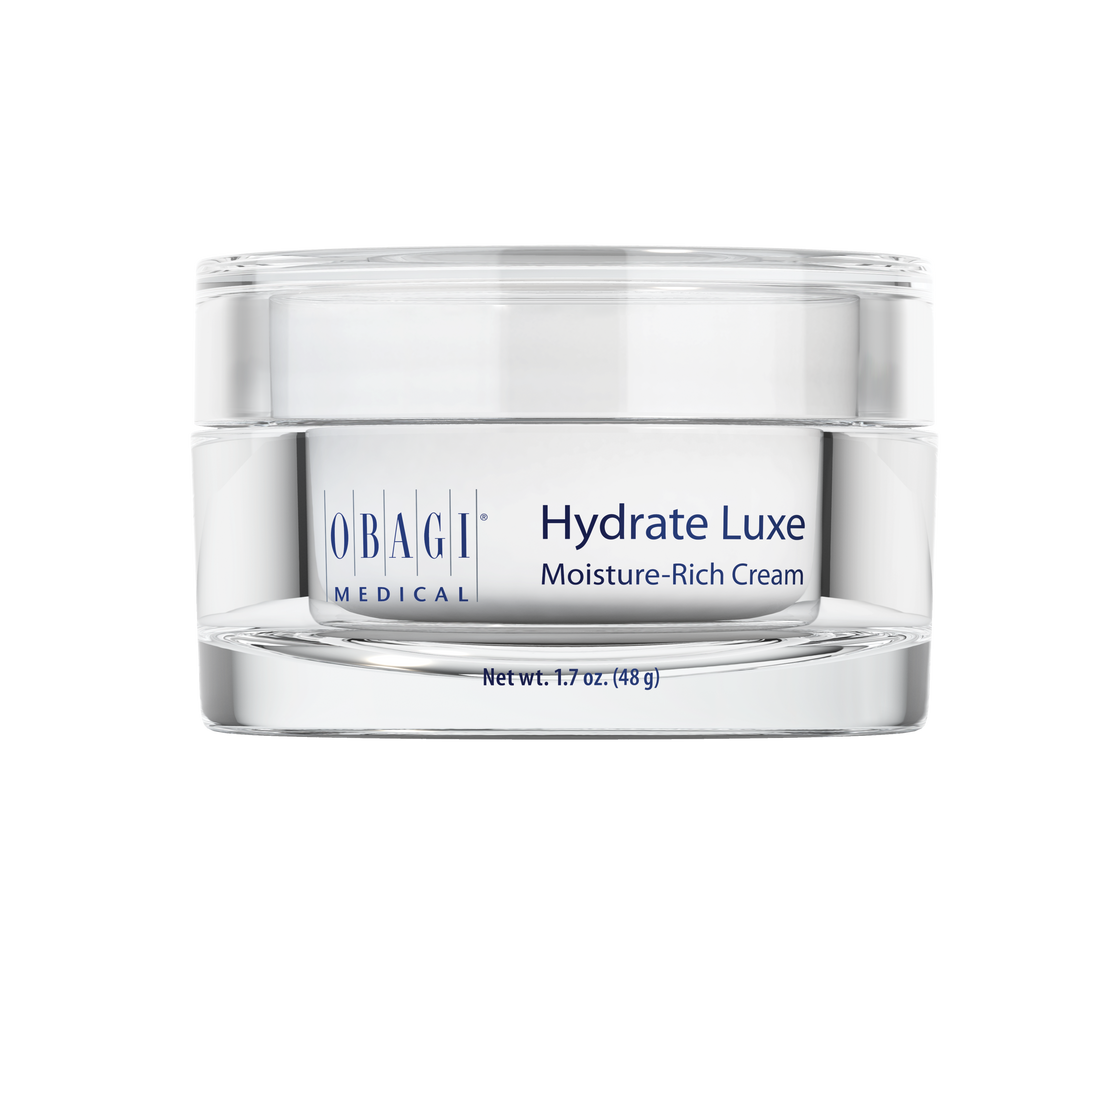 Obagi Hydrate Luxe 48g